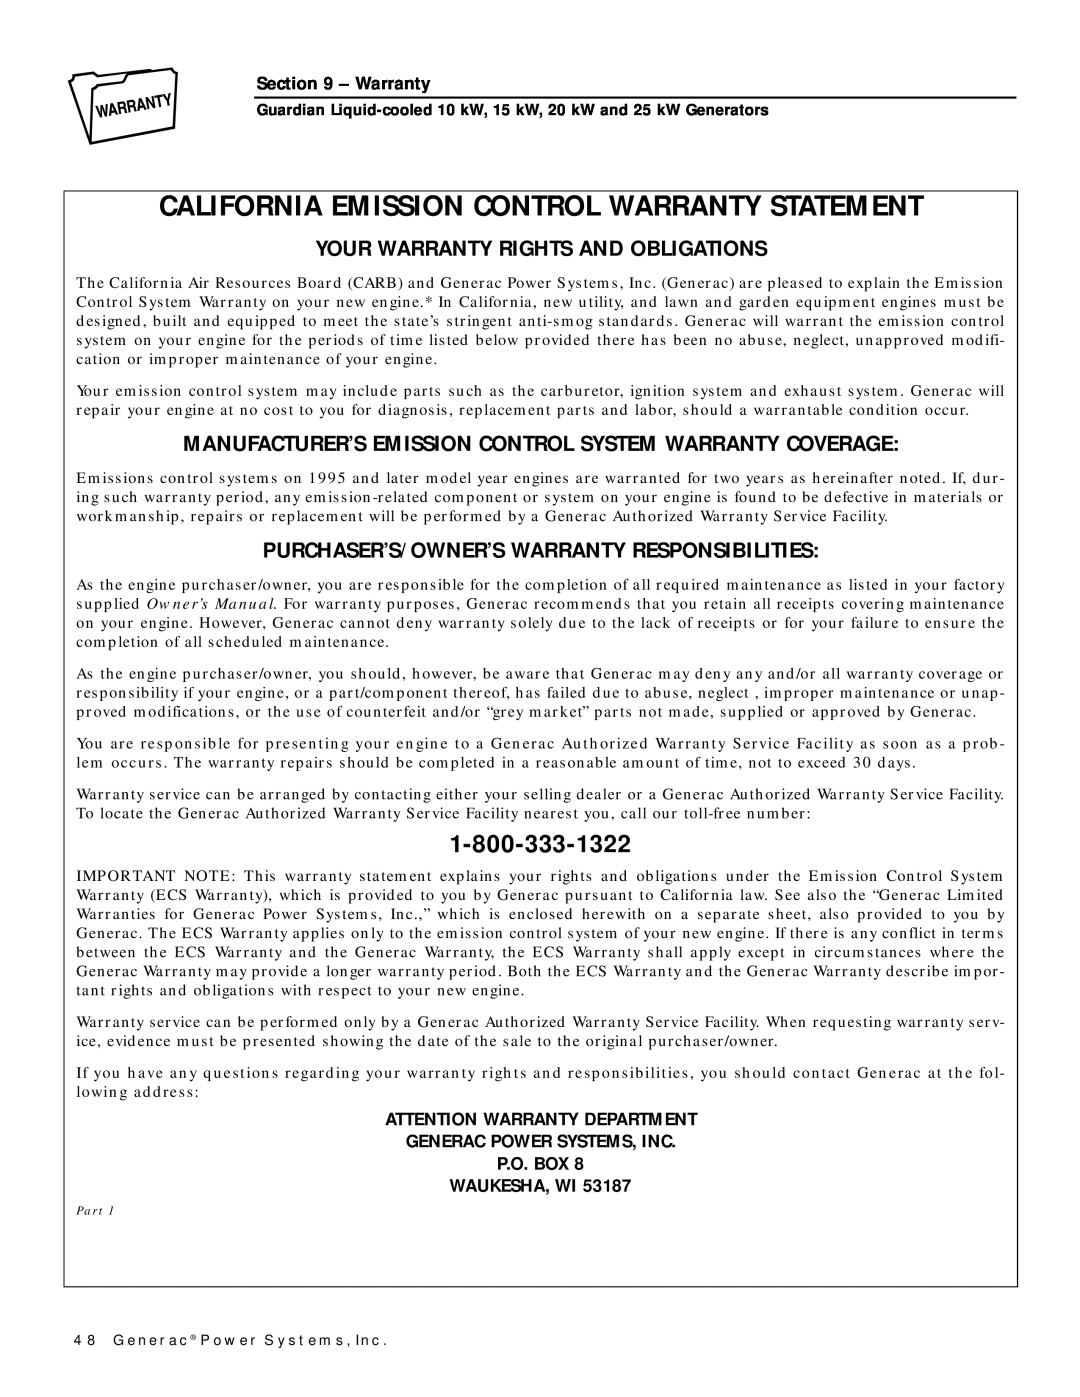 Generac Power Systems owner manual California Emission Control Warranty Statement, Your Warranty Rights And Obligations 